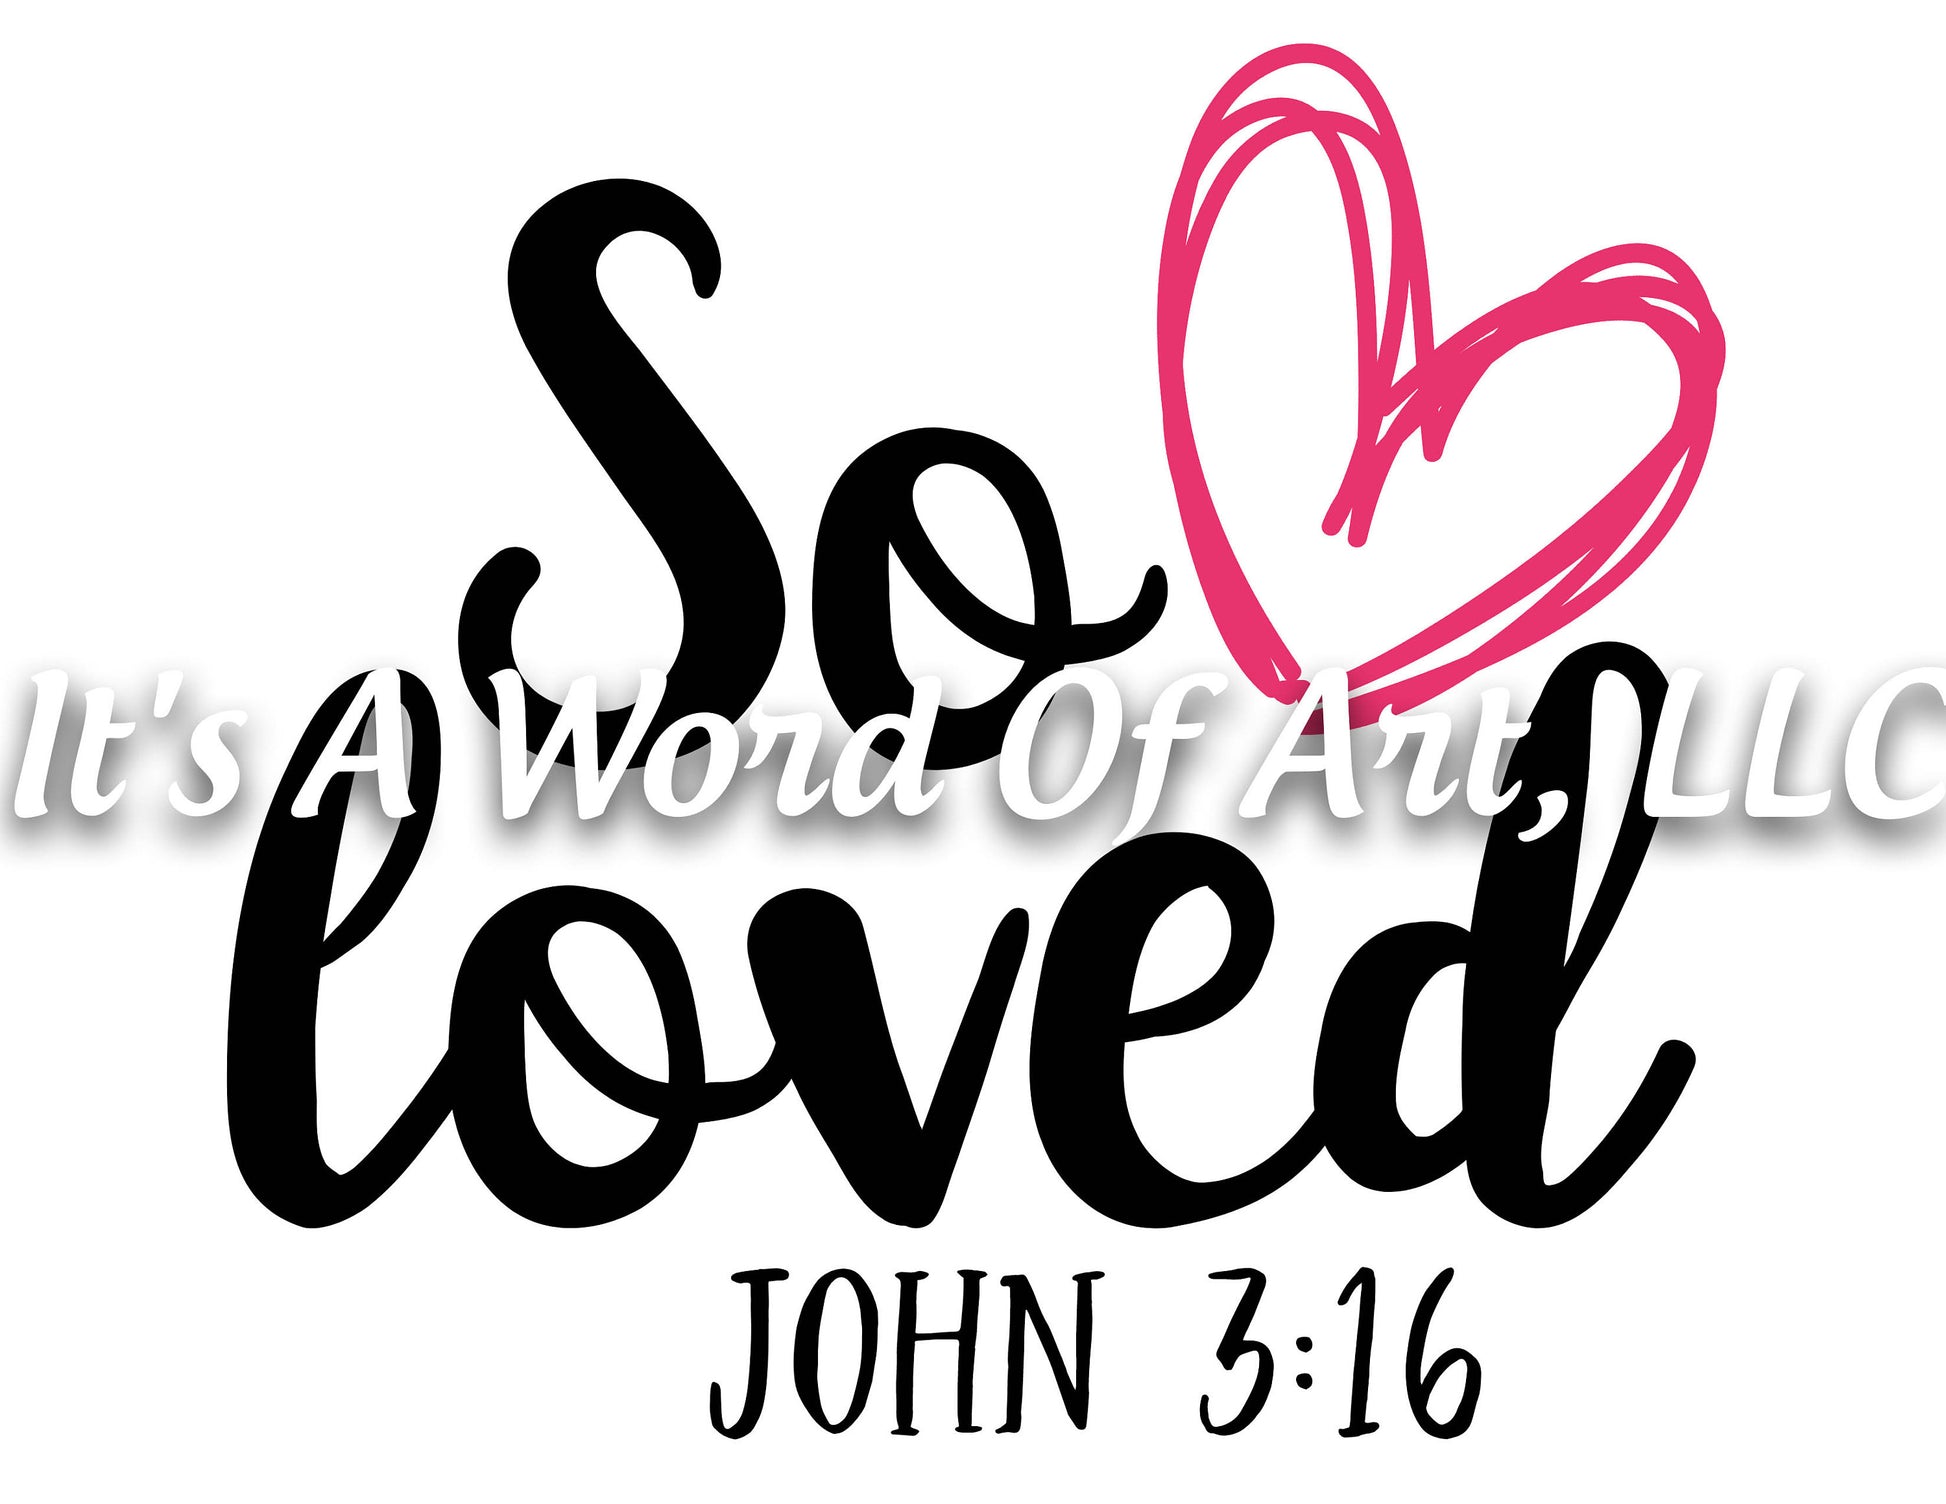 Valentines Day 7 - So Loved John 3:16 Heart - Sublimation Transfer Set/Ready To Press Sublimation Transfer/Sublimation Transfer